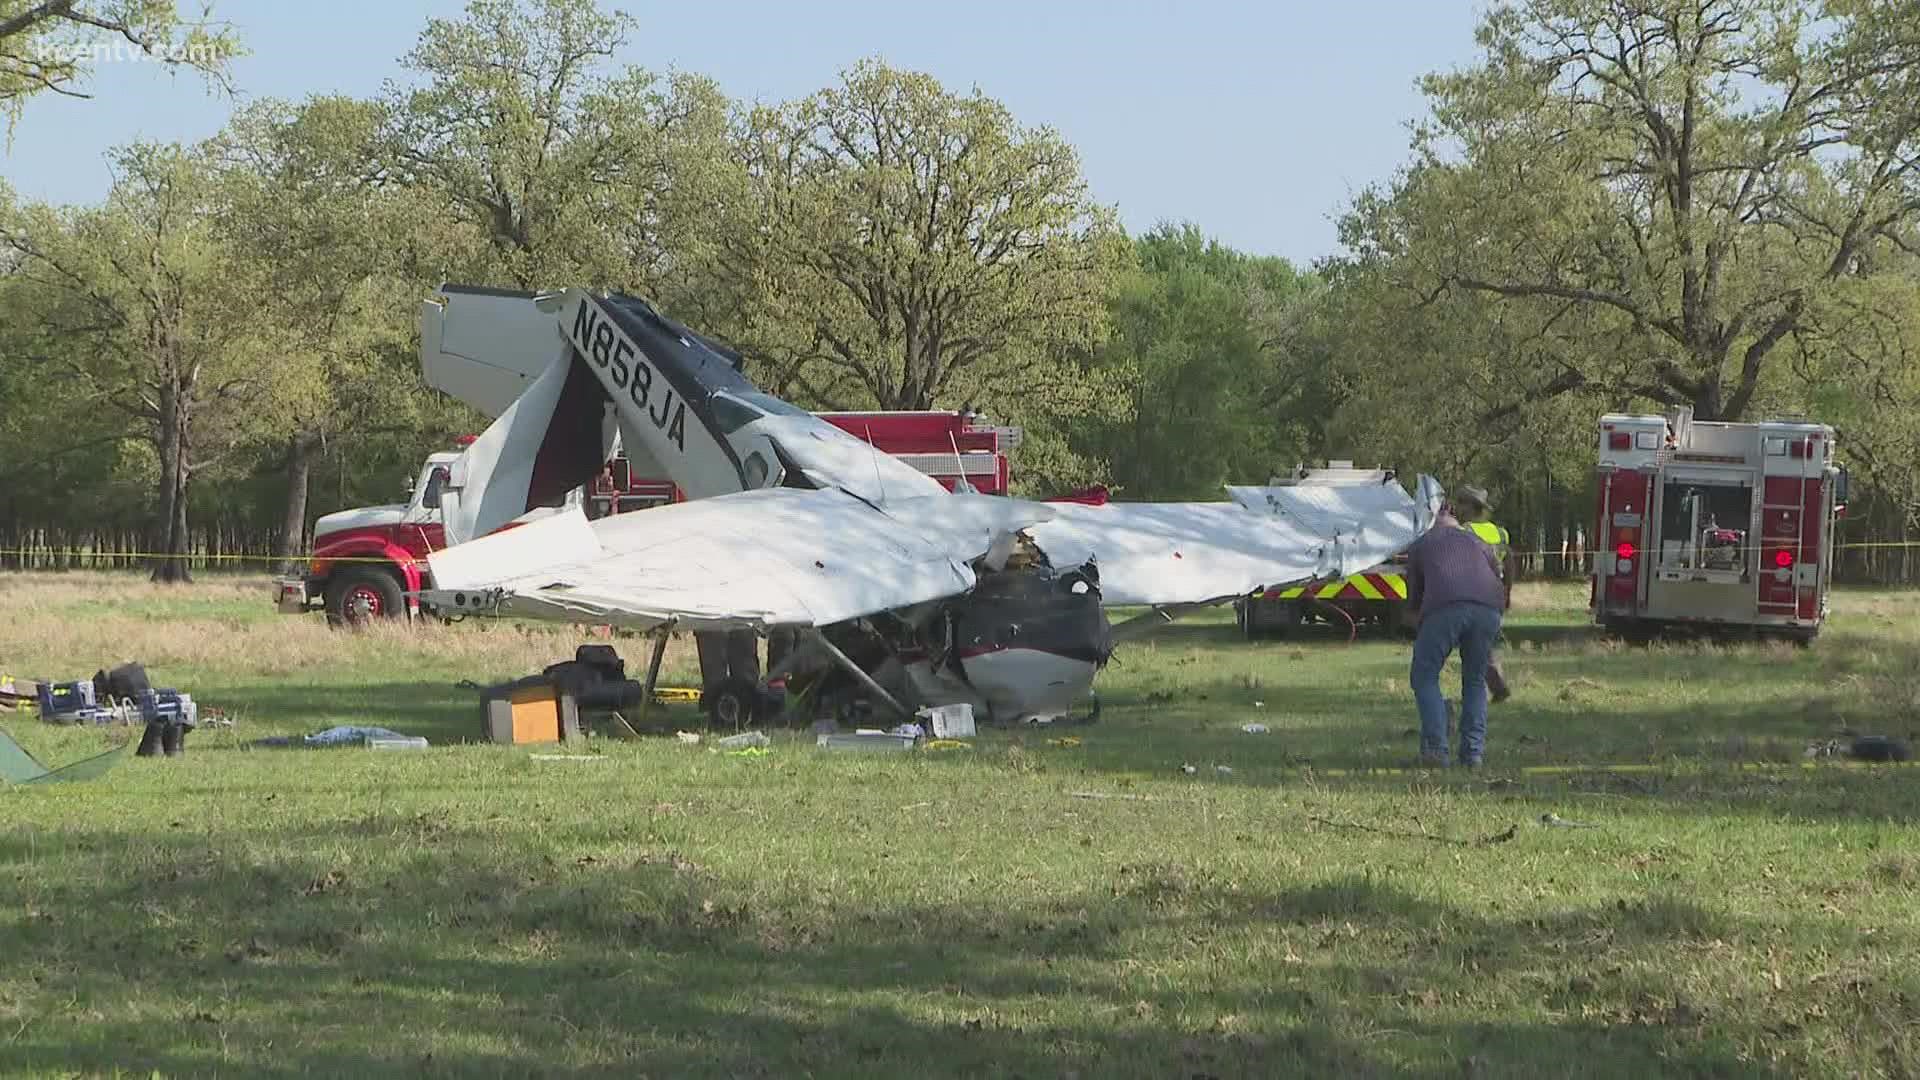 According to the Federal Aviation Administration, a single-engine Cessna T206H crashed around 12:40 p.m. east of the Marlin Airport, 500 block FM 147.